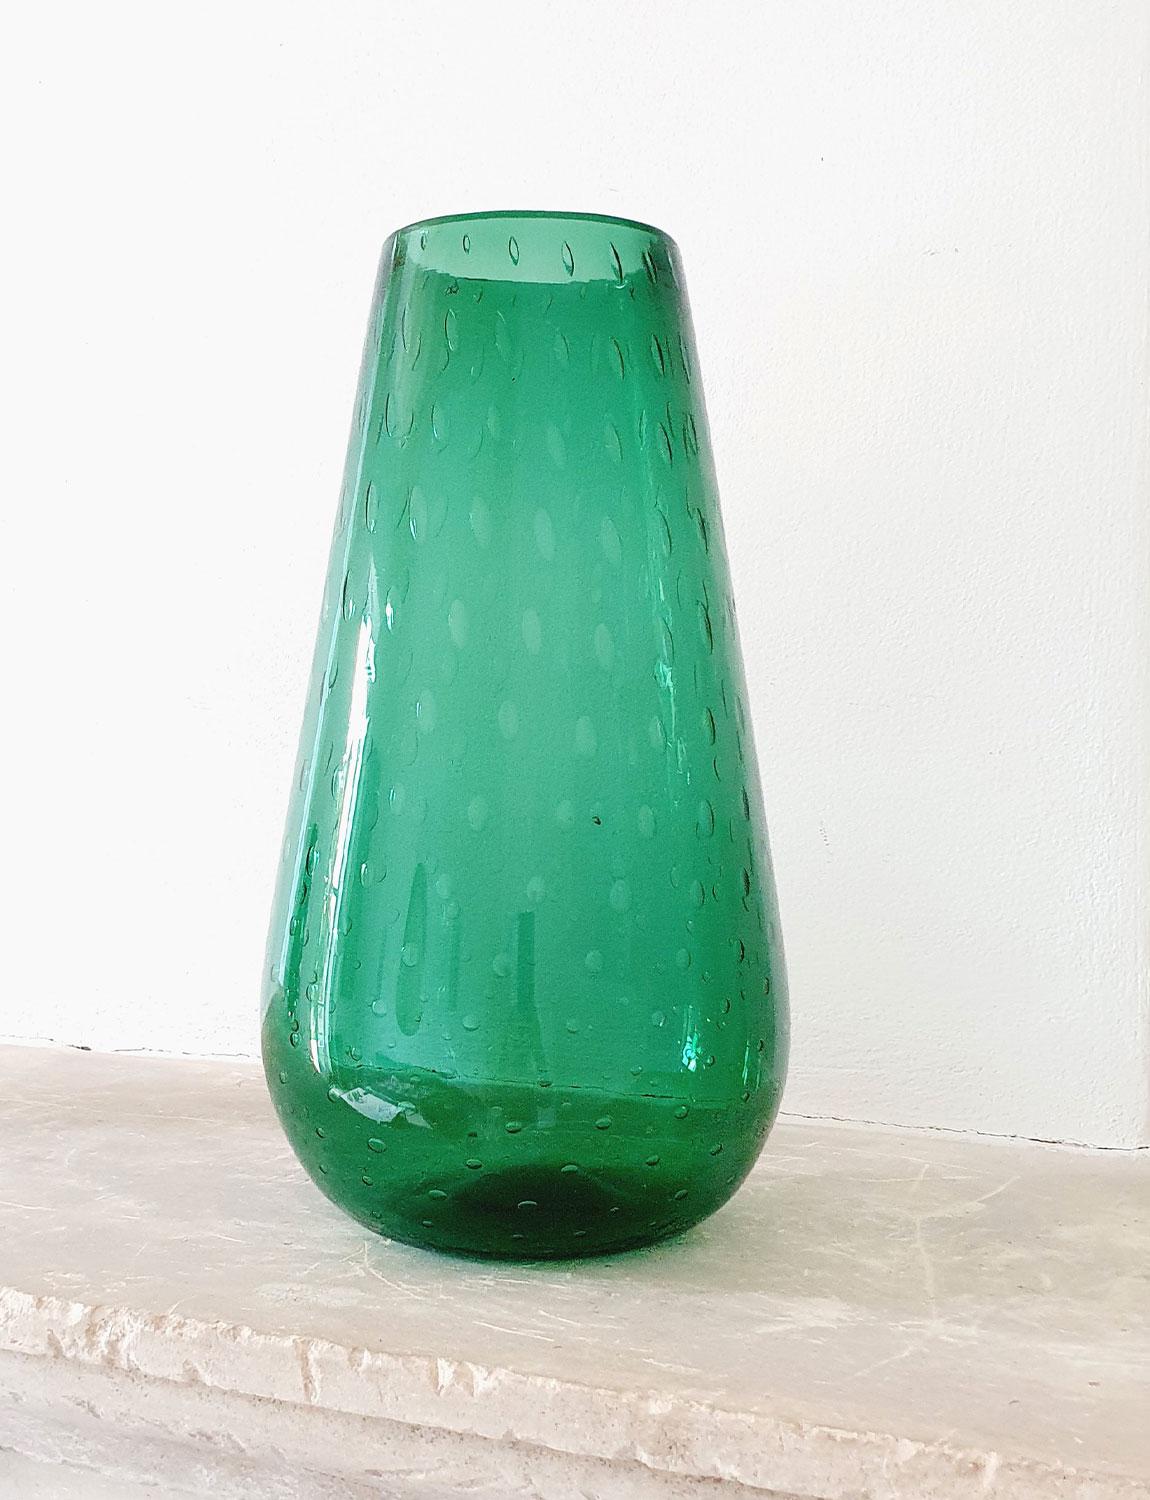 1970s Elegant Dark Green hand-blown Italian vase with bolle (bubbles) throughout. There is the mark on the base where the molten glass has been cut from the blow pipe evidencing it's hand-blown nature. Found here in Italy and in good condition.